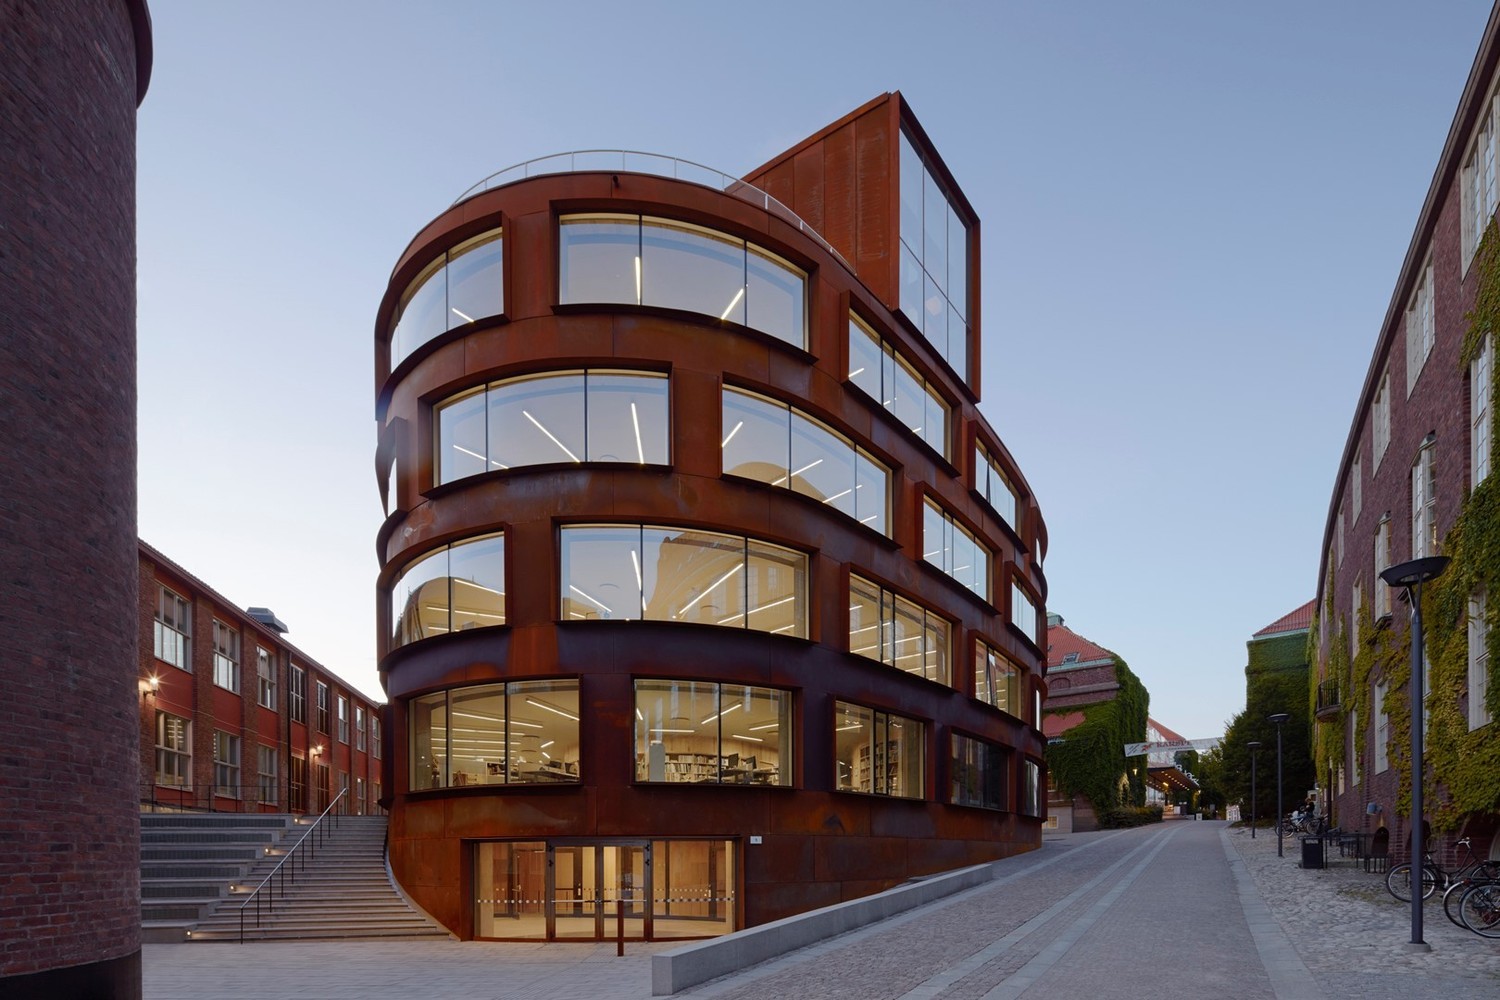 School_of_Architecture_at_the_Royal_Institute_of_Technology_-_Tham___Videga%CC%8Ard_Arkitekter._Image_%C2%A9_A%CC%8Ake_Eson_Lindman Archdaily dodijelio nagrade Building of the year